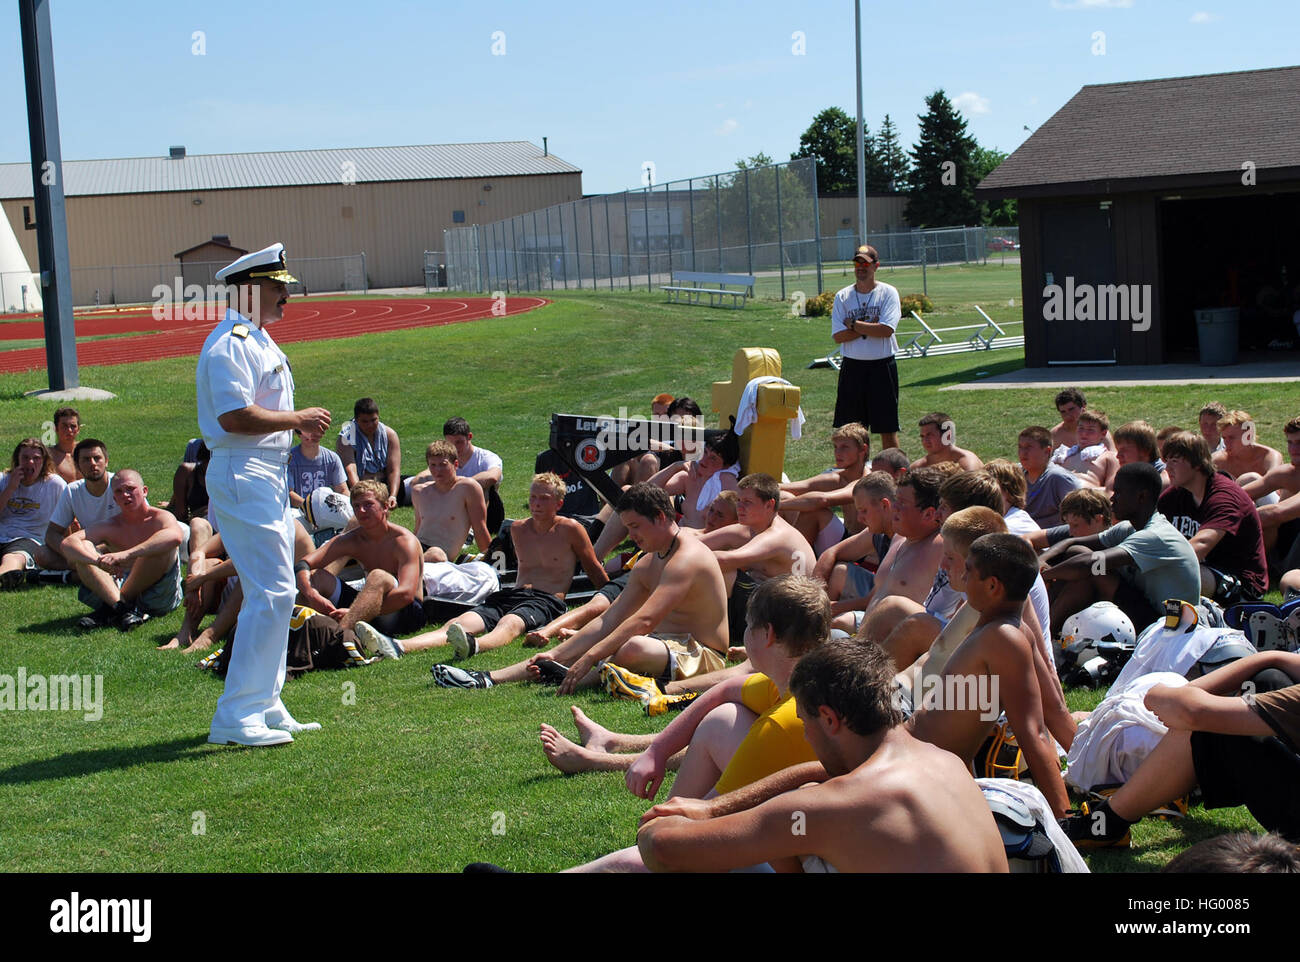 110811-N-CI293-167  FARGO, N.D. (Aug. 11, 2011) Rear Adm. Mark D. Guadagnini, deputy commander for Fleet Management and chief of staff for U.S. Fleet Forces Command, speaks to the Fargo South High School football team at a practice during Fargo Navy Week, one of 21 Navy weeks across America in 2011. Navy weeks are intended to showcase the investment Americans have made in their Navy and increase awareness in cities that do not have a significant Navy presence. (U.S. Navy photo by Senior Chief Mass Communication Specialist Susan Hammond/Released) US Navy 110811-N-CI293-167 Rear Adm. Mark D. Gua Stock Photo